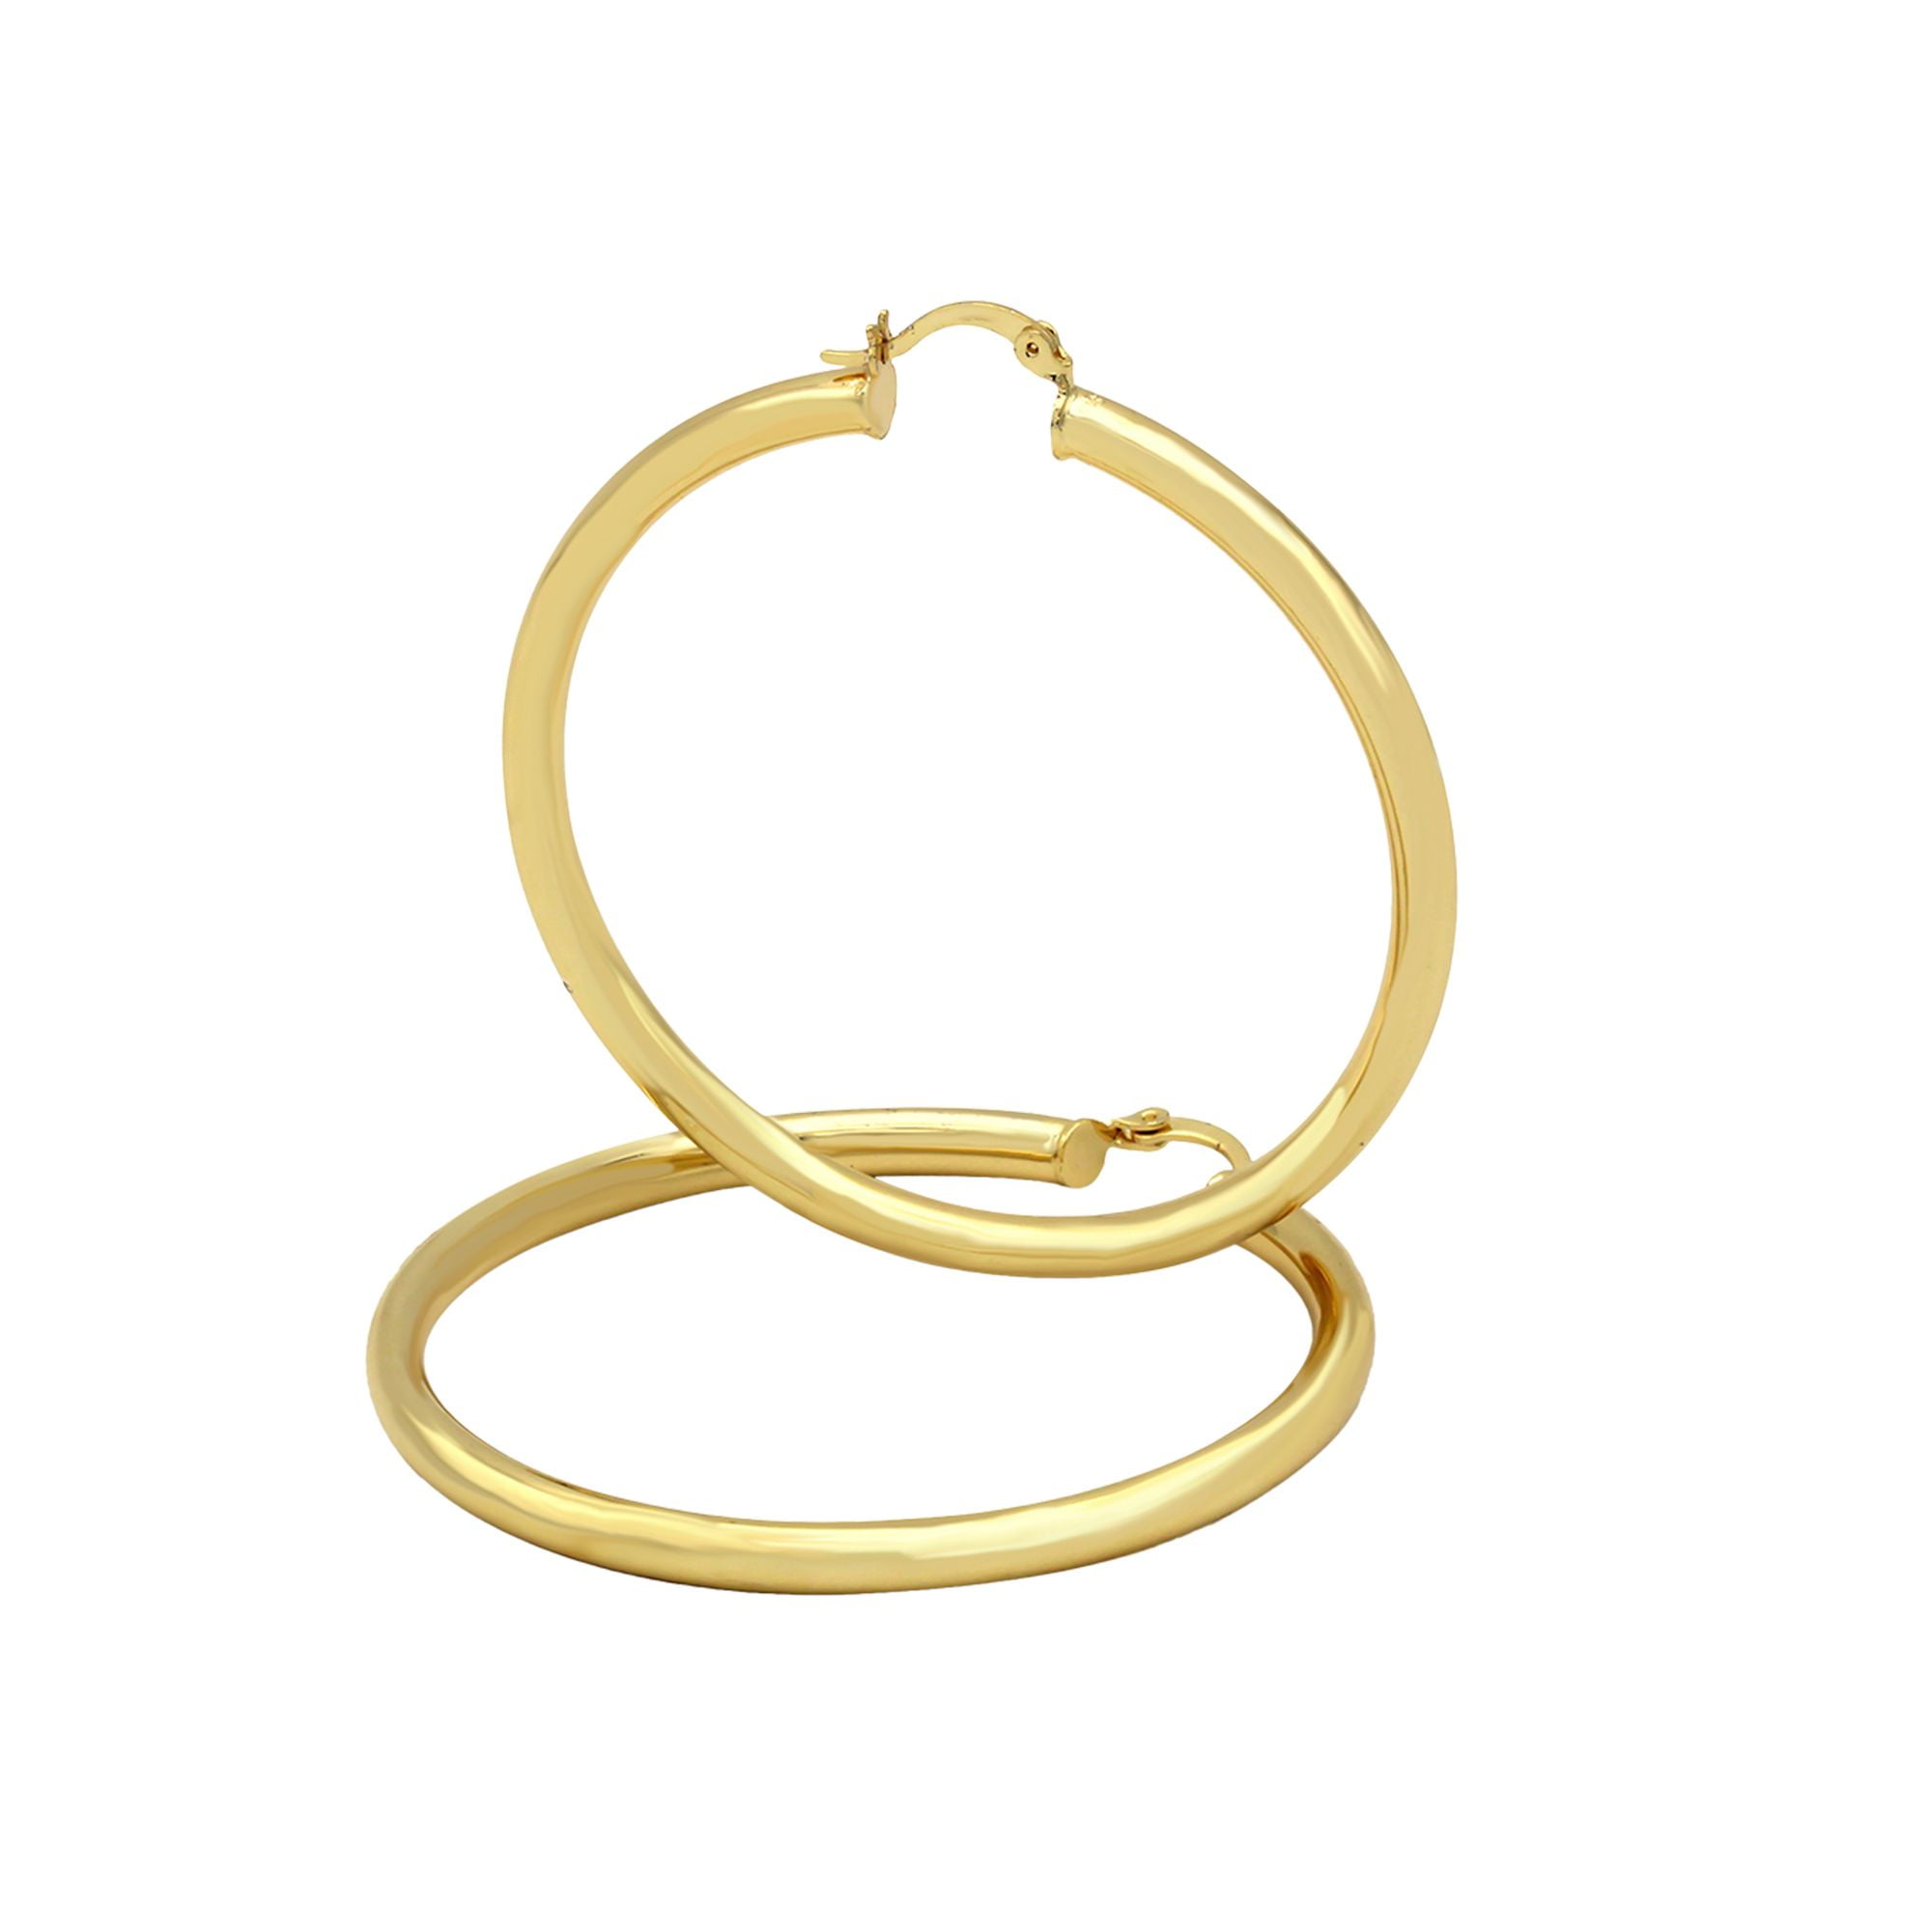 Gold Silver Hoops Disc Plain Earrings 60MM Round Small Big Fashion Jewellery UK 